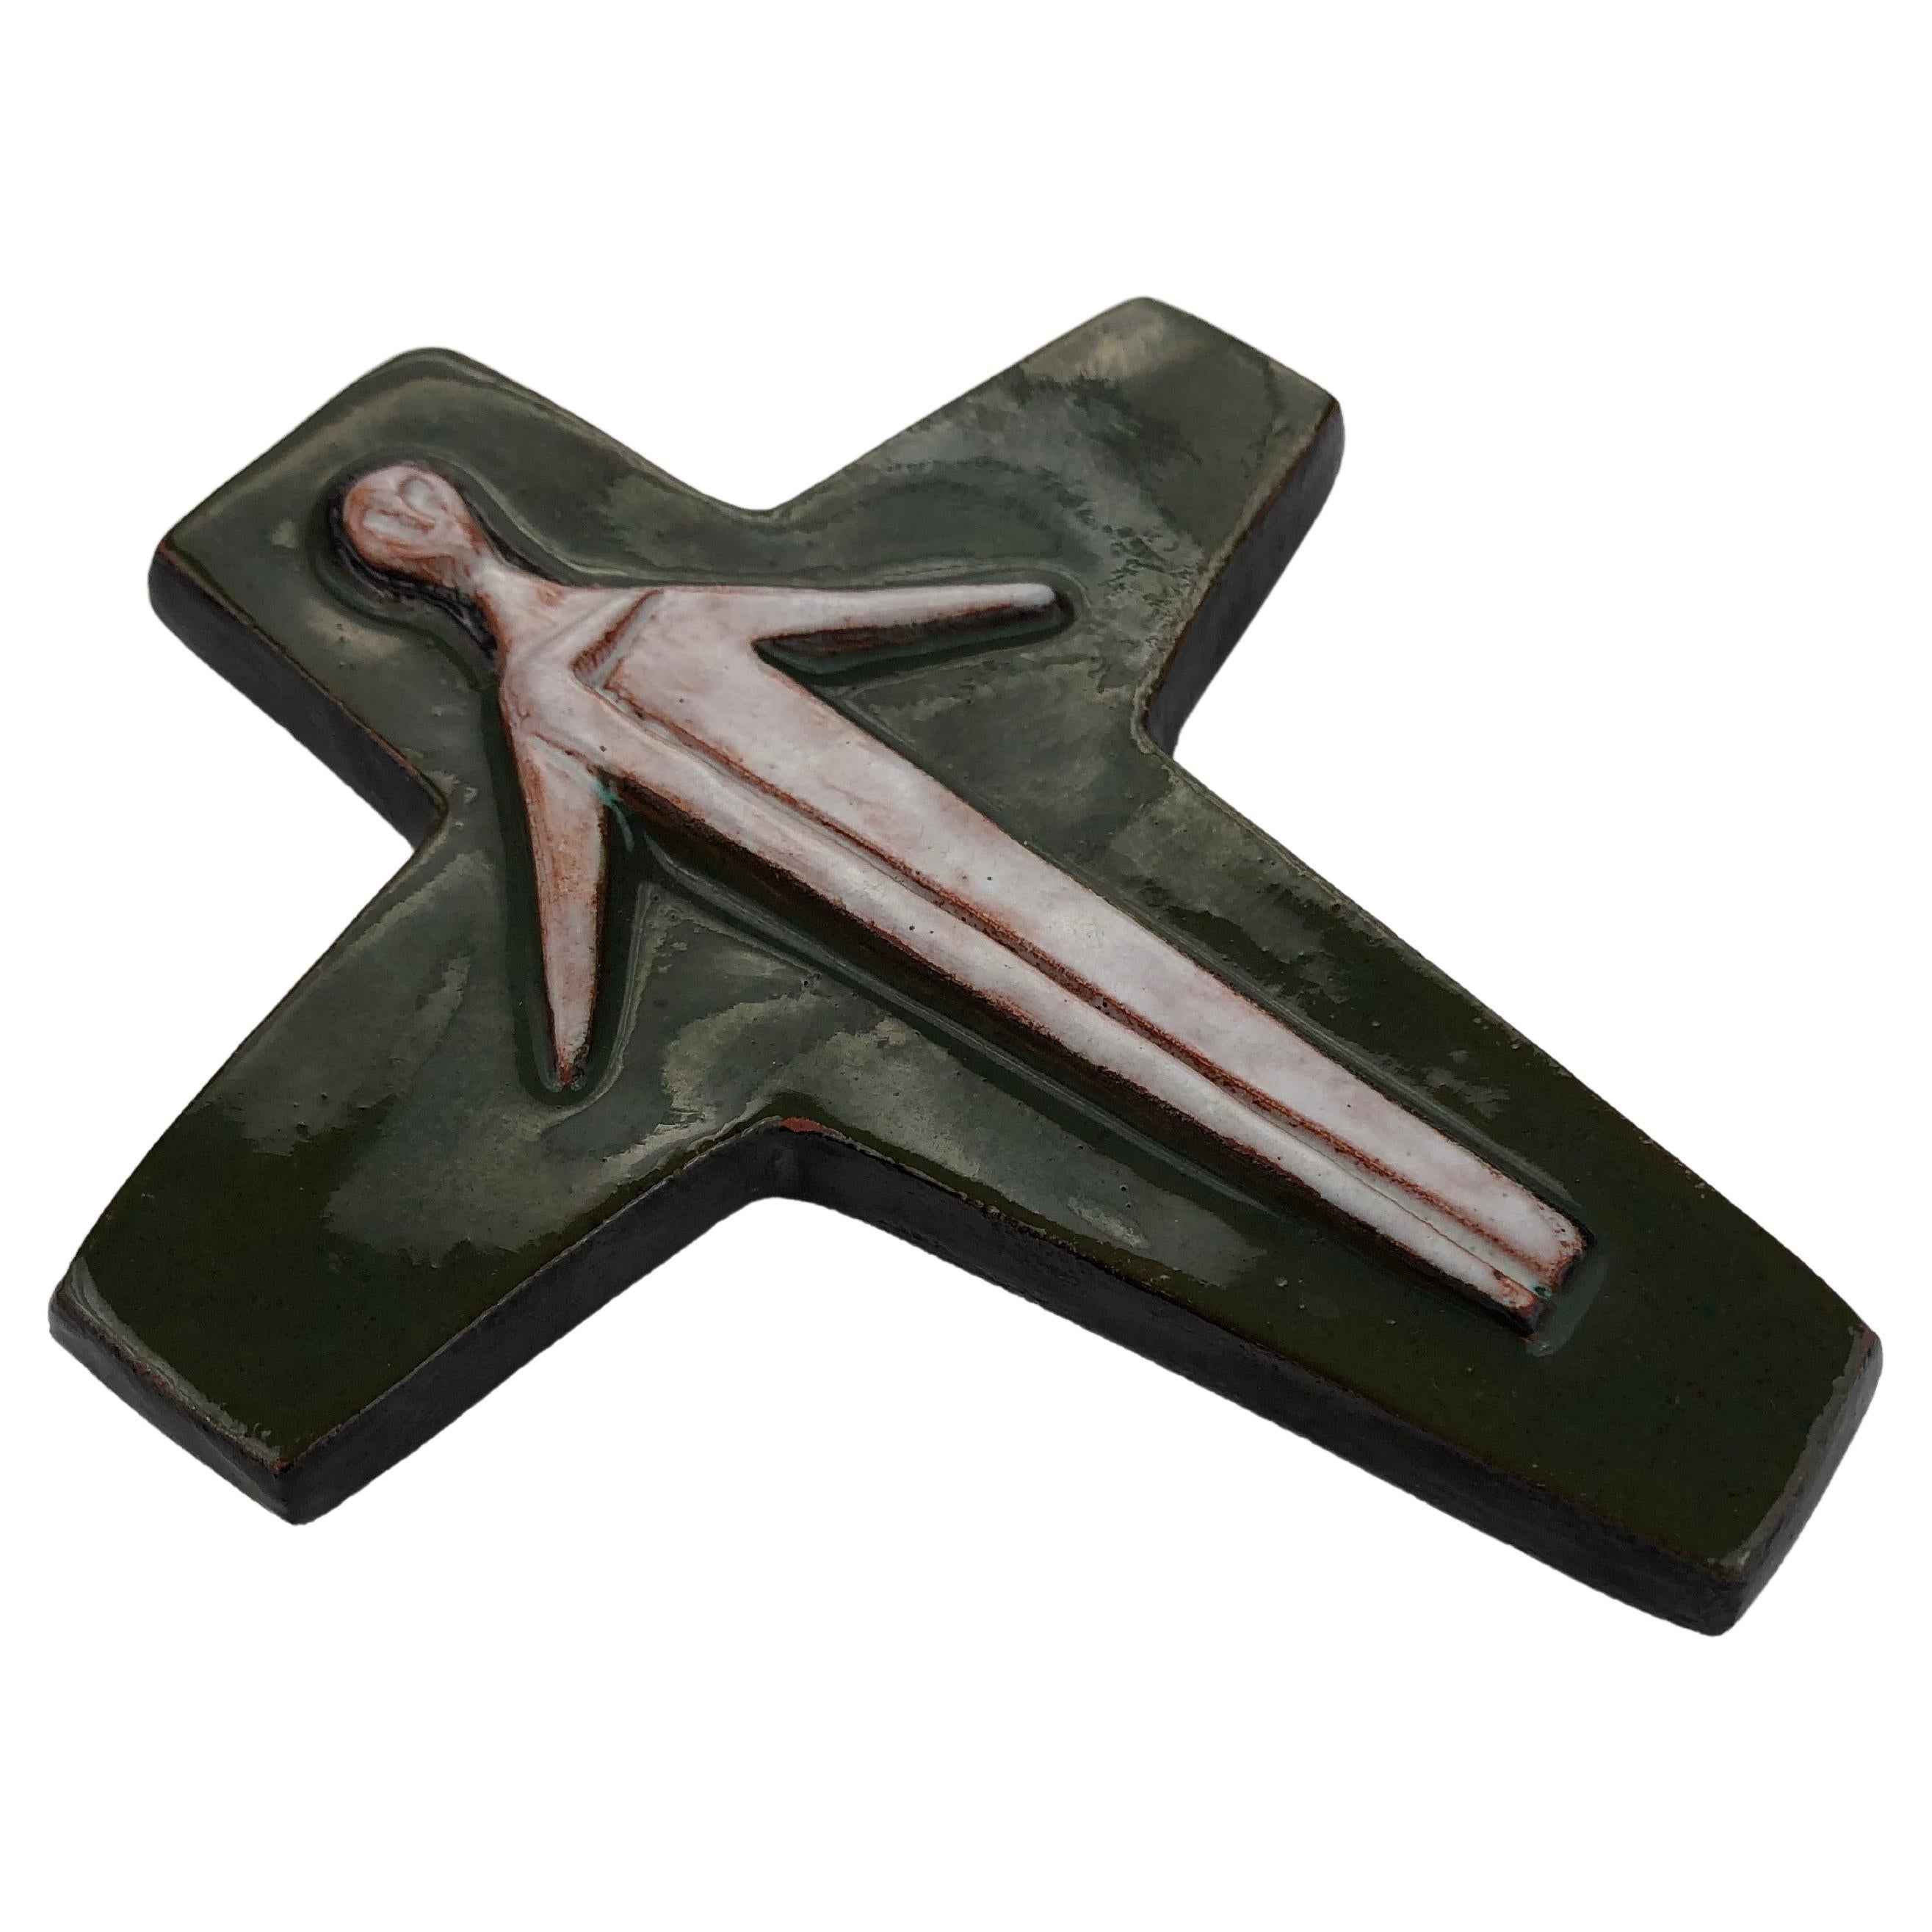 A brown green, glossy, midcentury ceramic cross with a minimal, otherworldly Christ figure. This piece is part of our large collection of crosses meticulously handmade by skilled Flemish artisans.

The enigmatic Christ figure is raised in matte